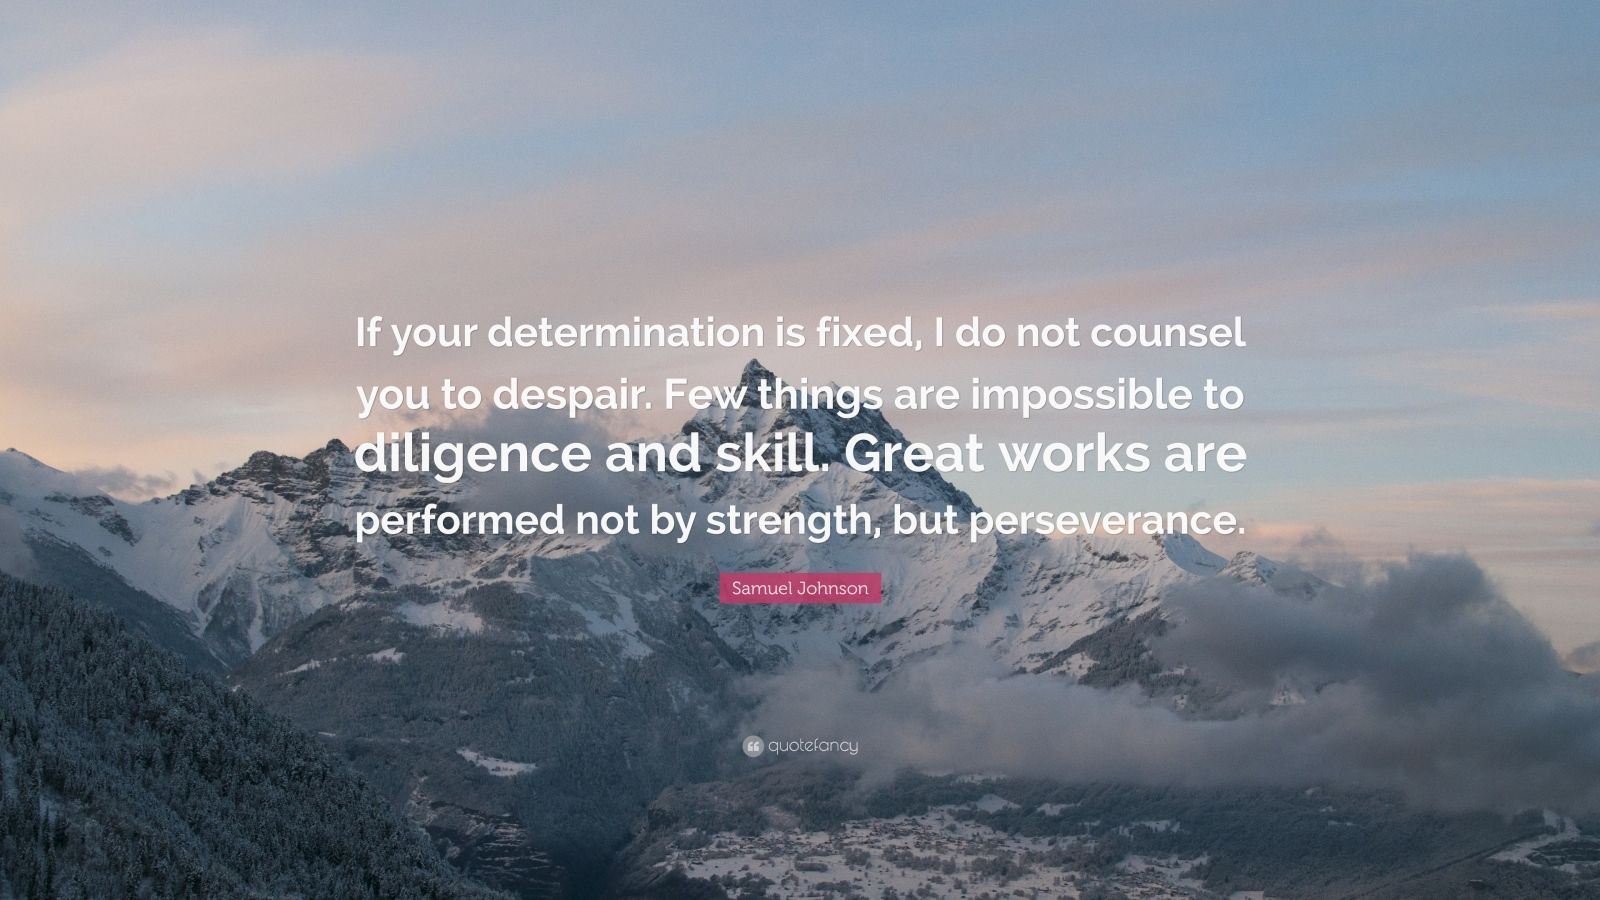 Samuel Johnson Quote: “If your determination is fixed, I do not counsel